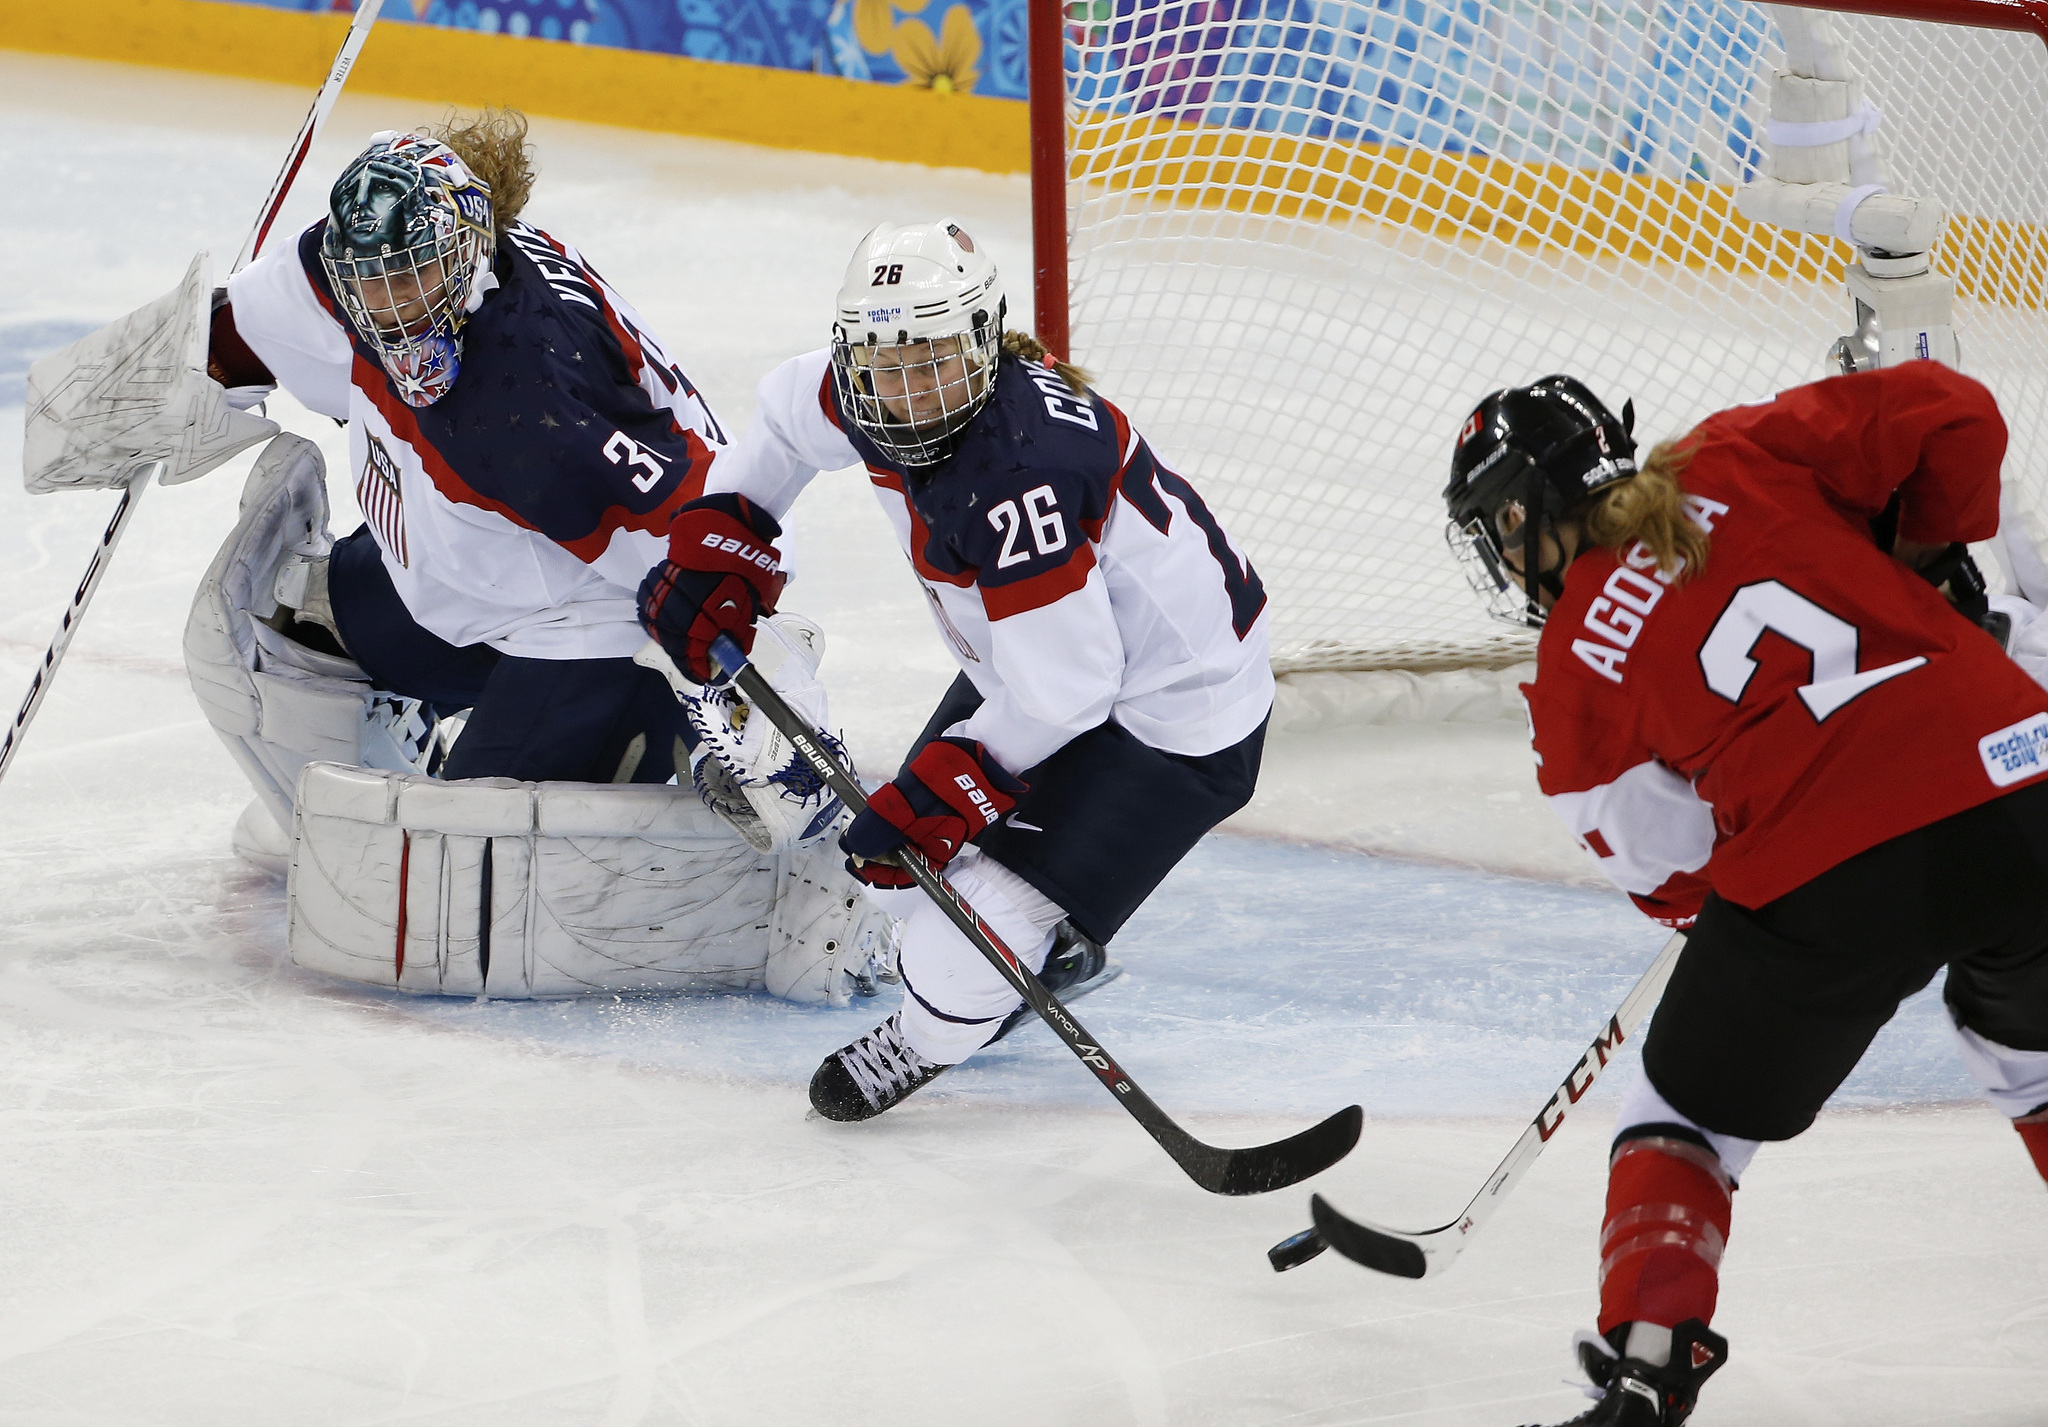 Women's ice hockey team from the U.S. silver medal wallpapers and